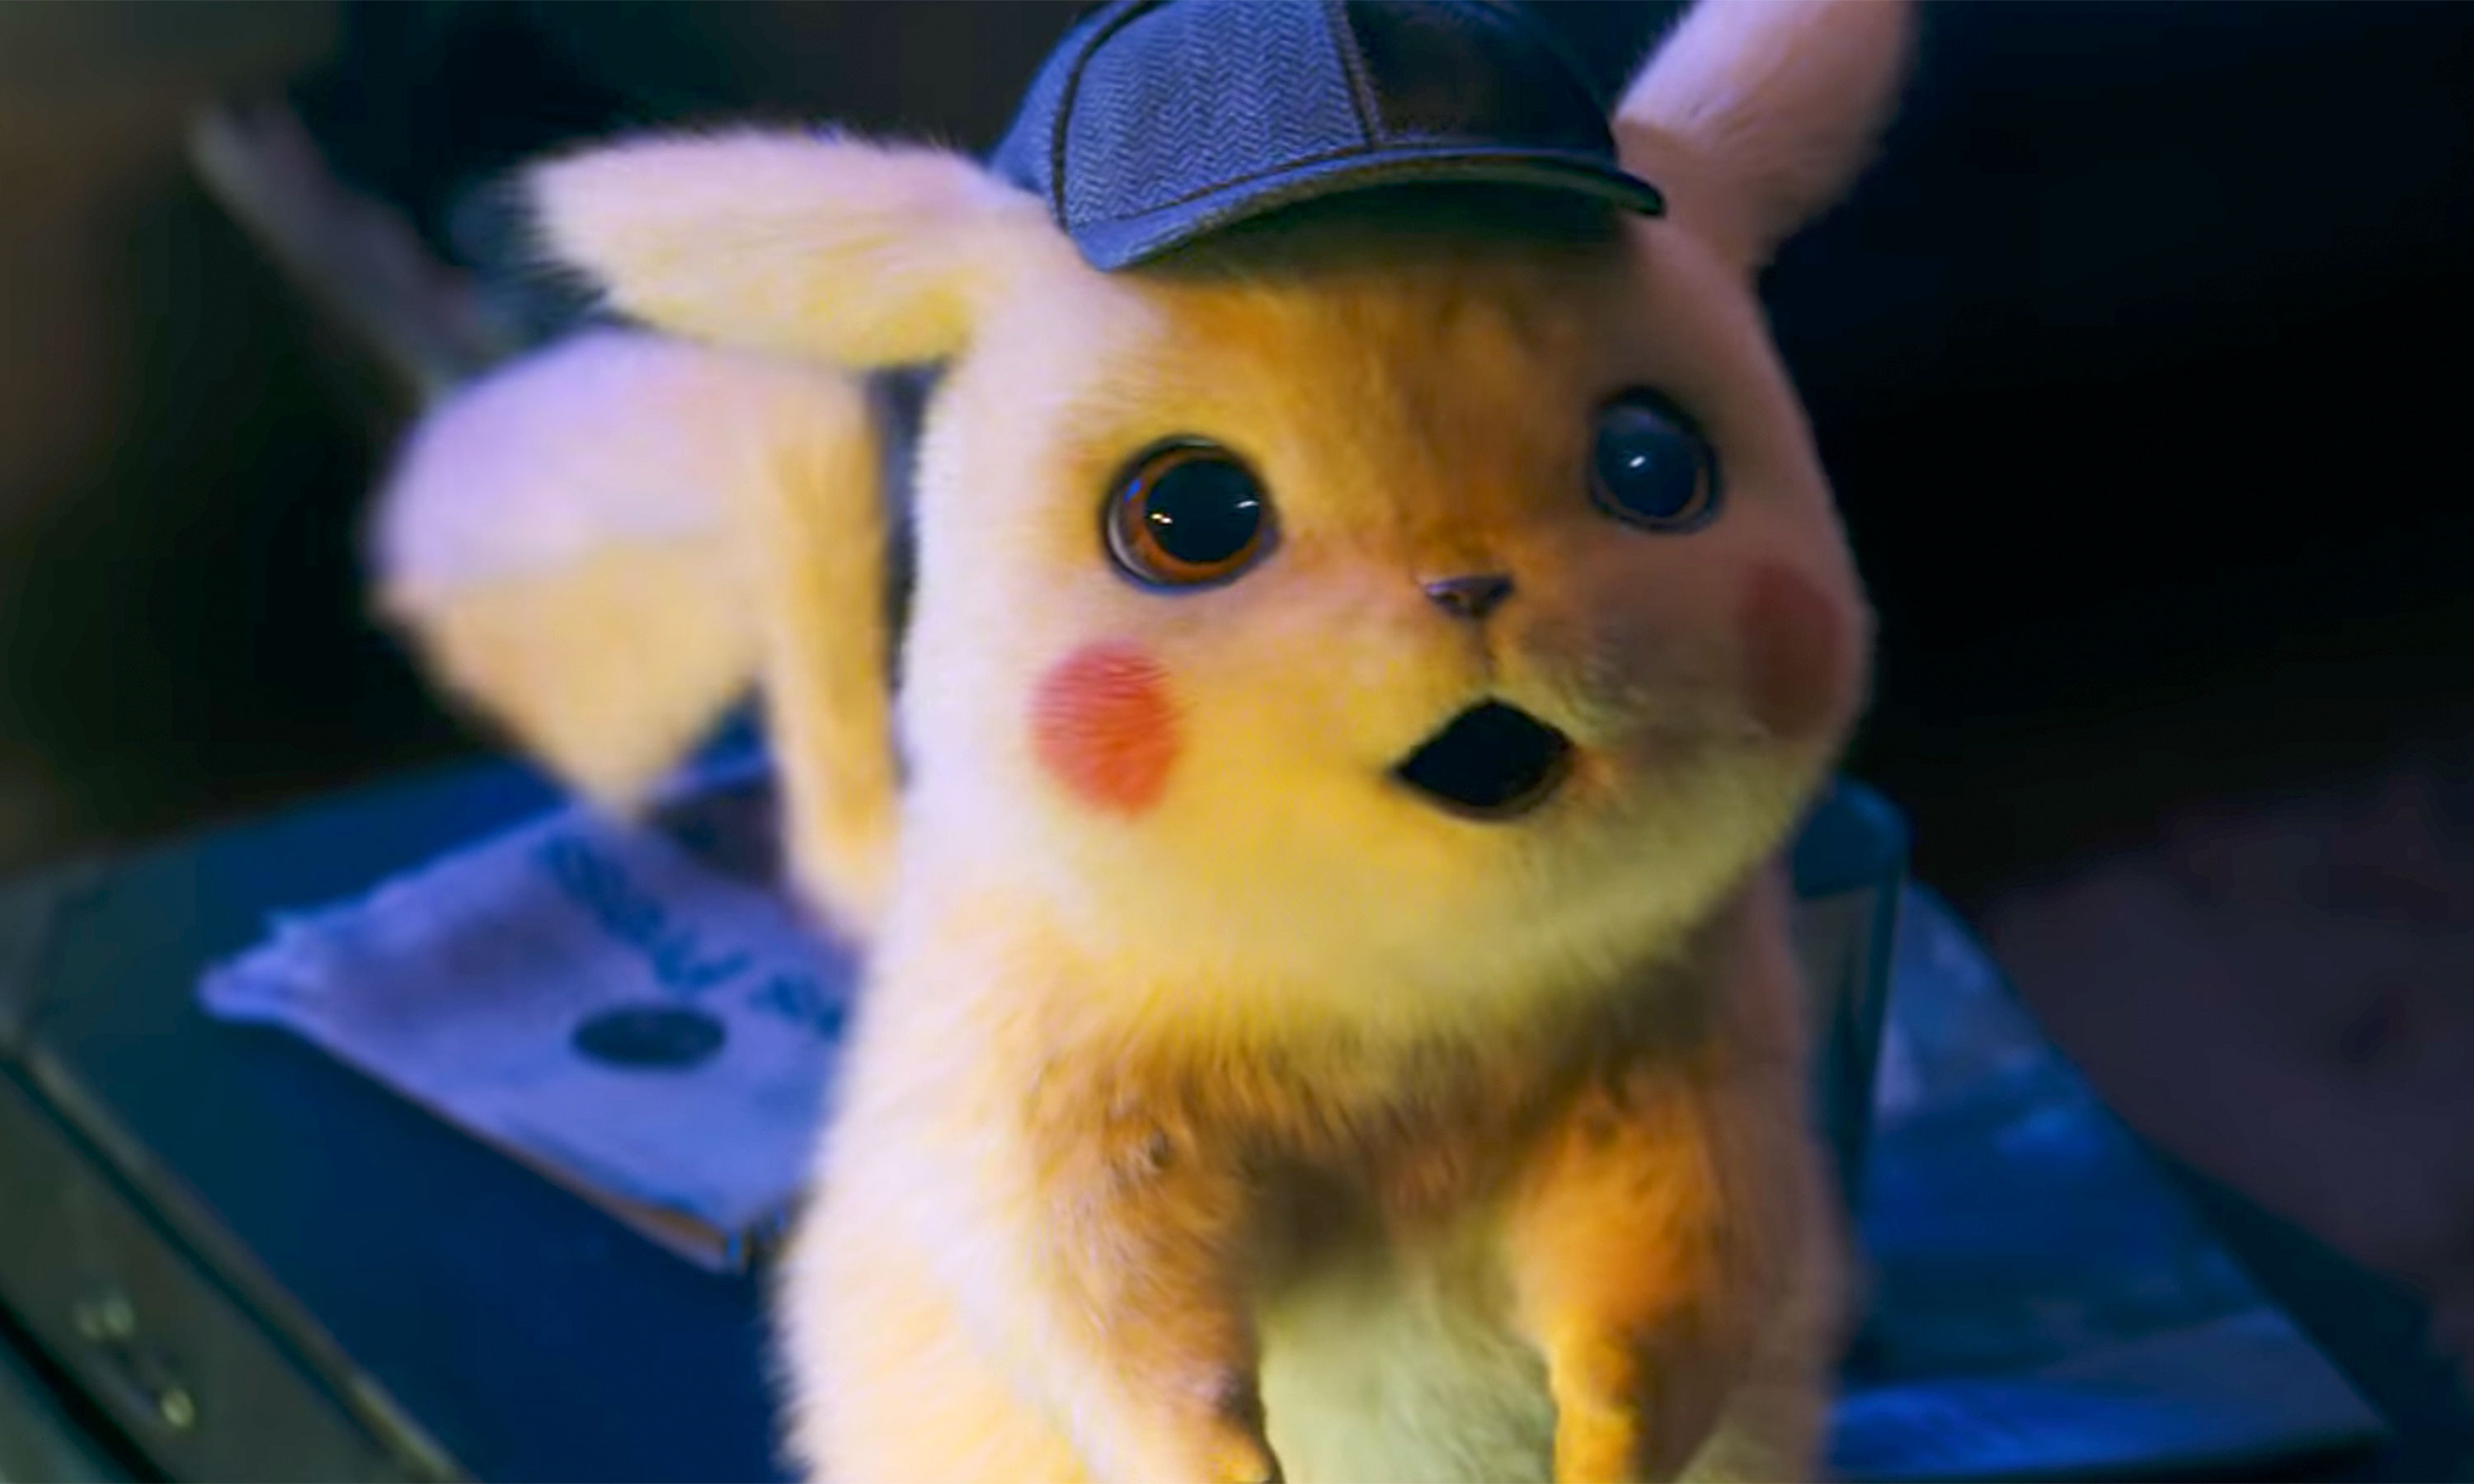 Pikachu looking up, mouth agape in Pokemon: Detective Pikachu